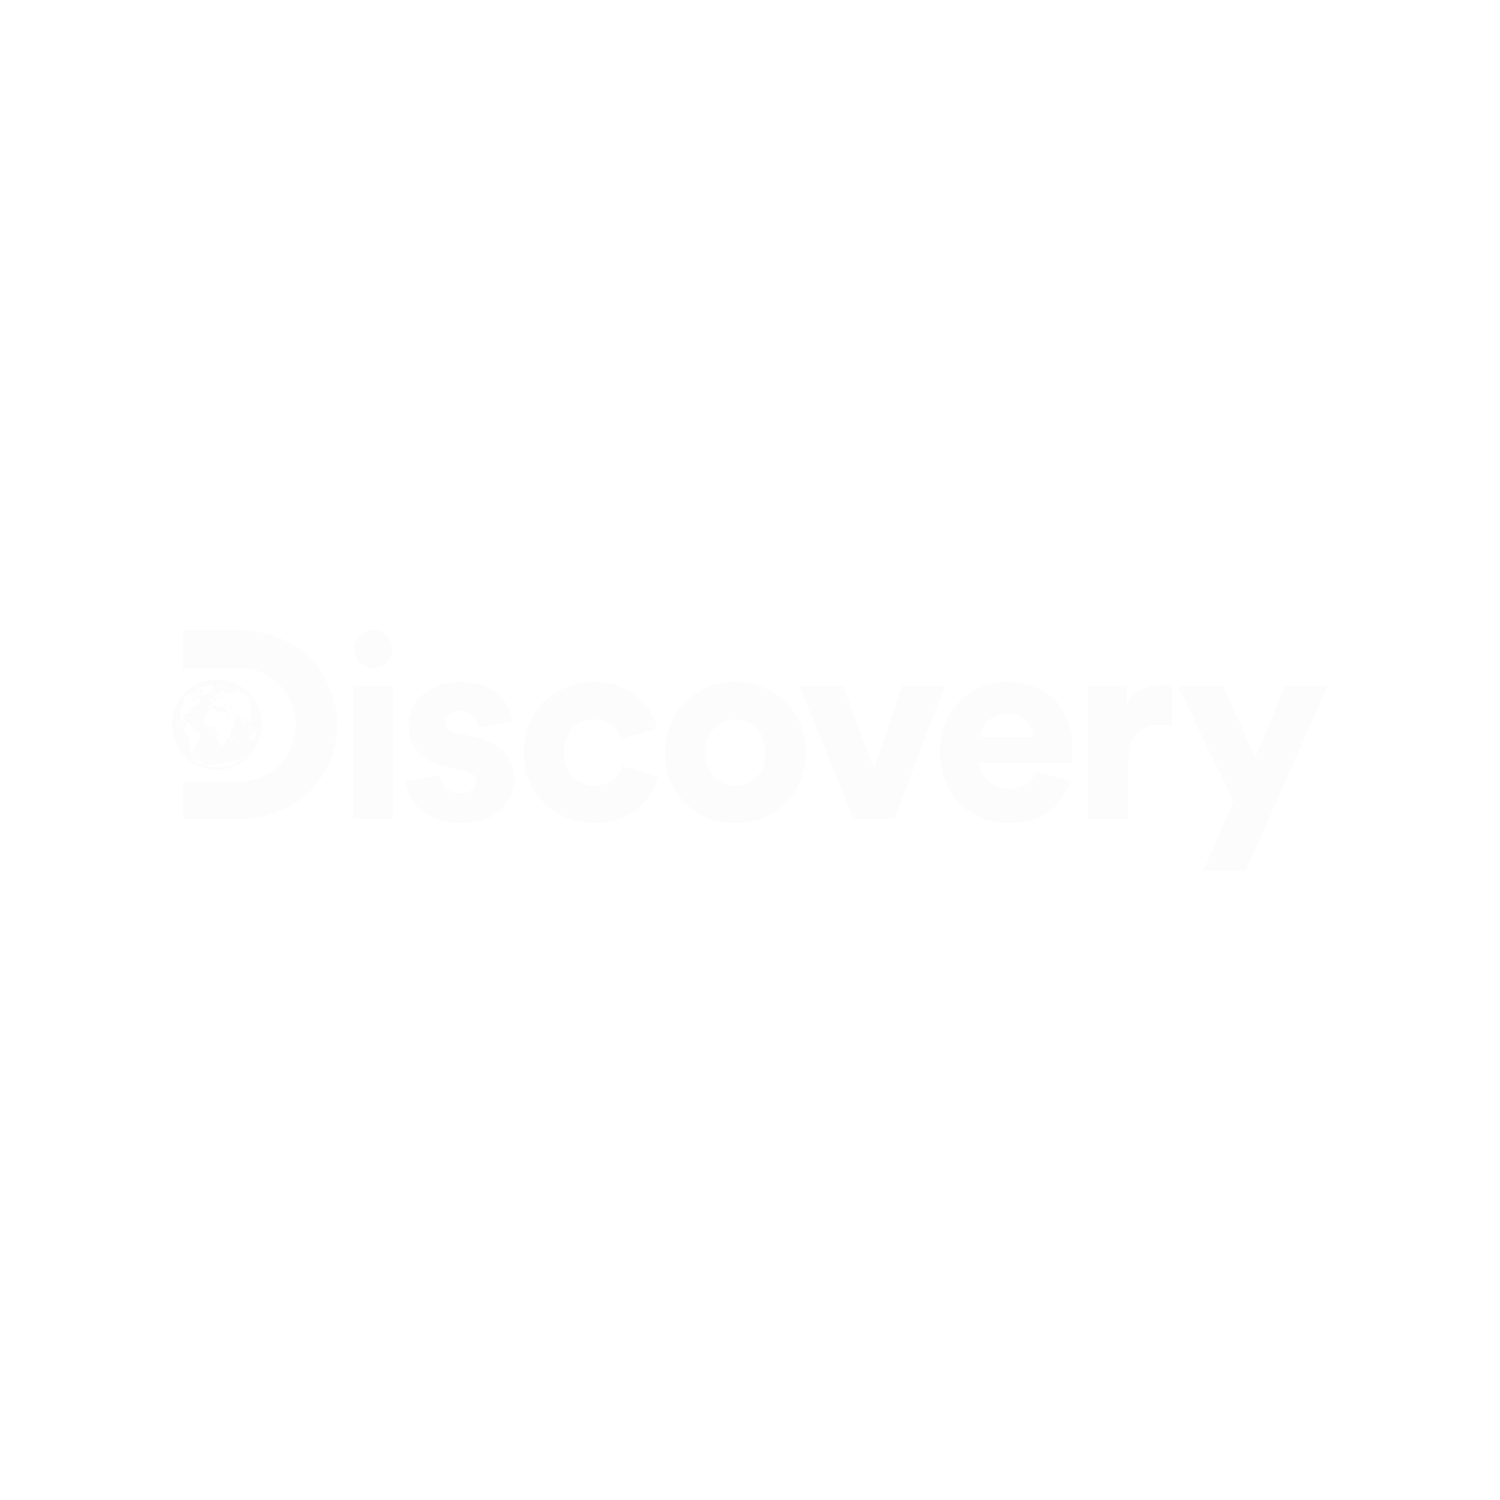 00__0024_Discovery.png